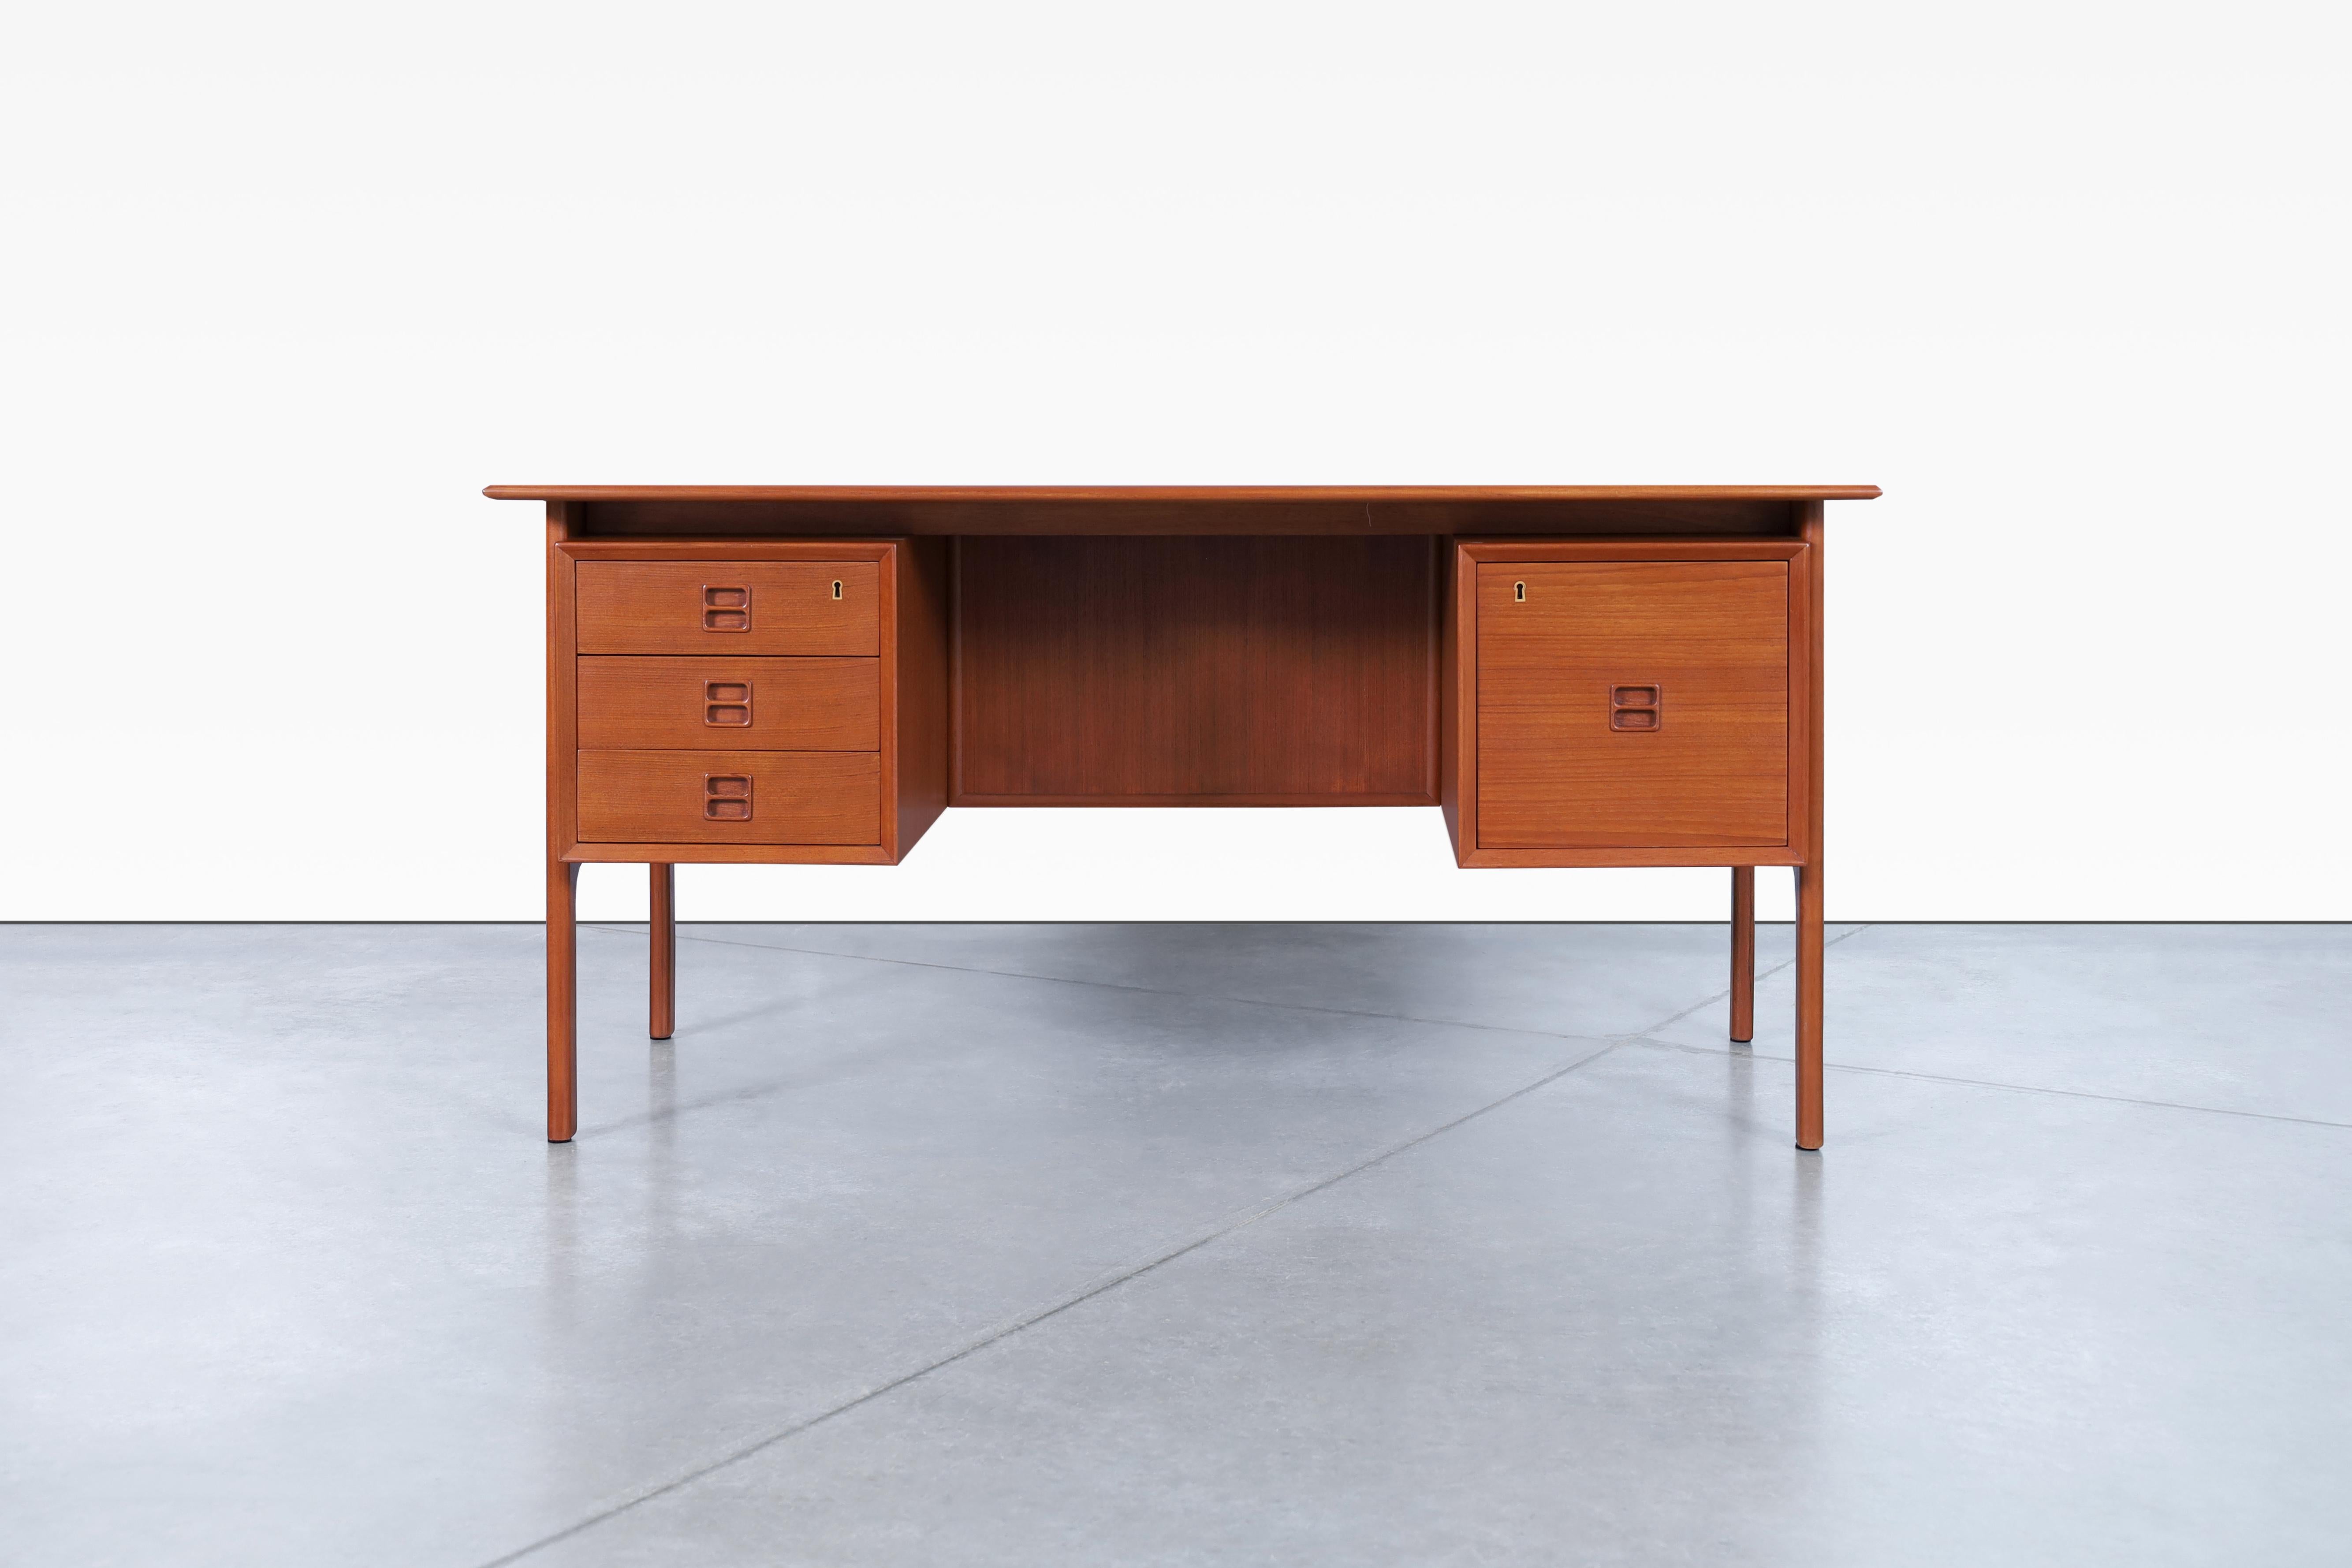 Wonderful Danish modern teak desk designed by Erik Brouer for Brouer Møbelfabrik in Denmark, circa 1960’s. This stunningly refurbished desk has been expertly crafted to greatly represent Danish design, complete with beautiful handcrafted handles